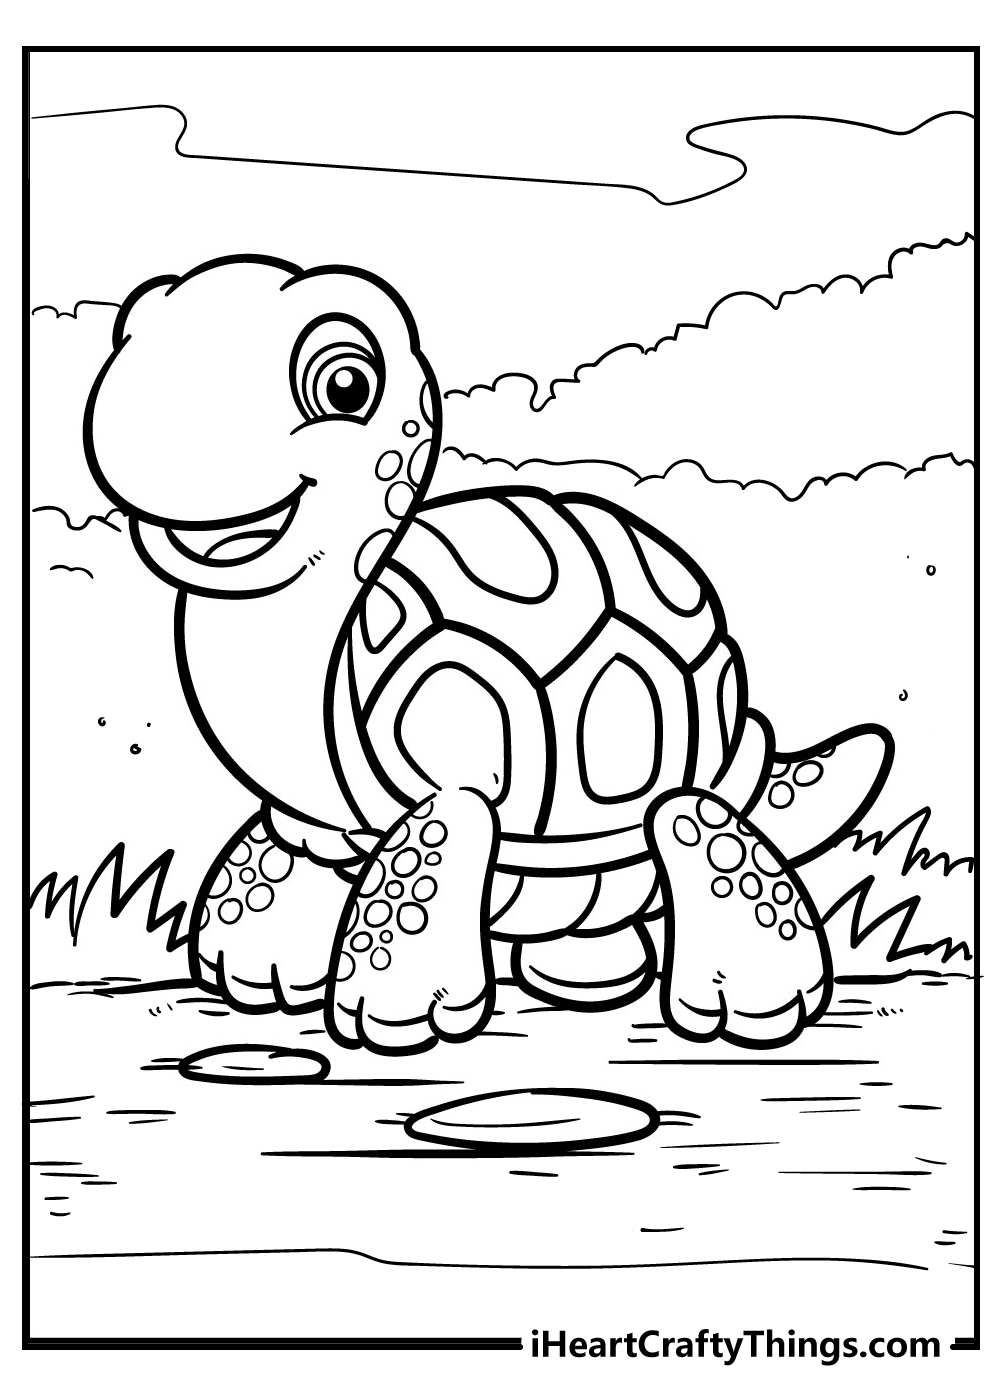 Turtle coloring pages free printables